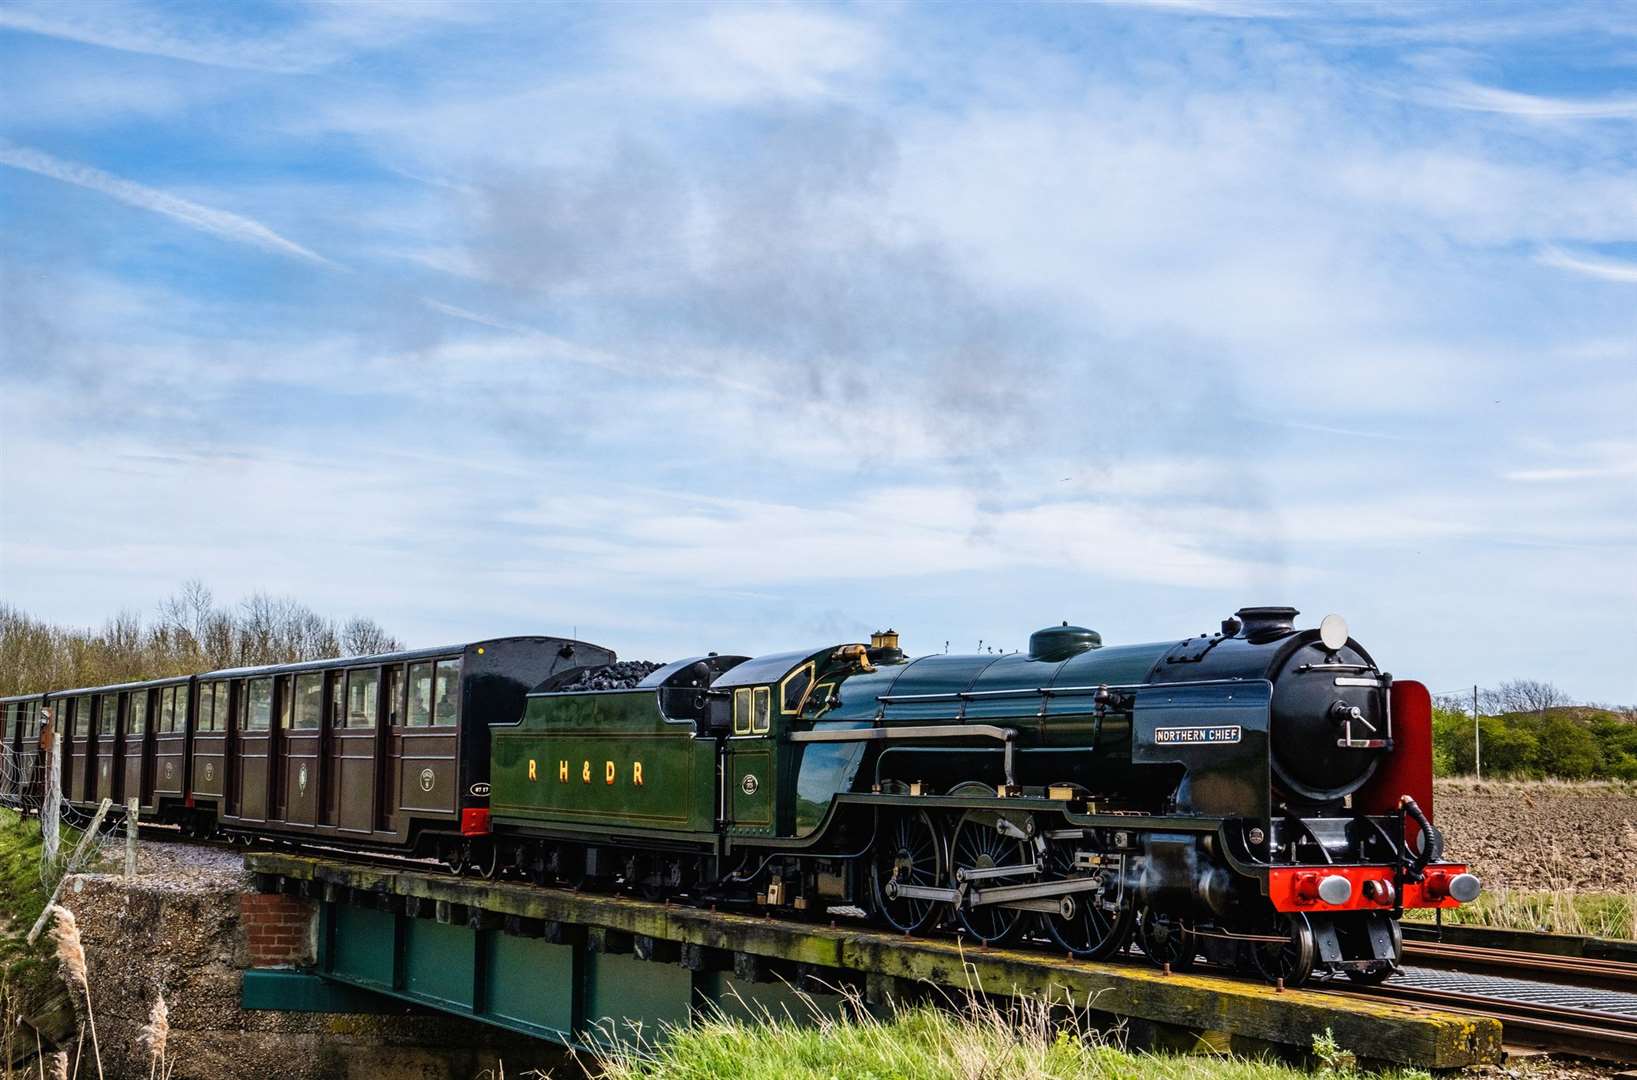 The Romney, Hythe and Dymchurch Railway is one of the world's smallest public railways